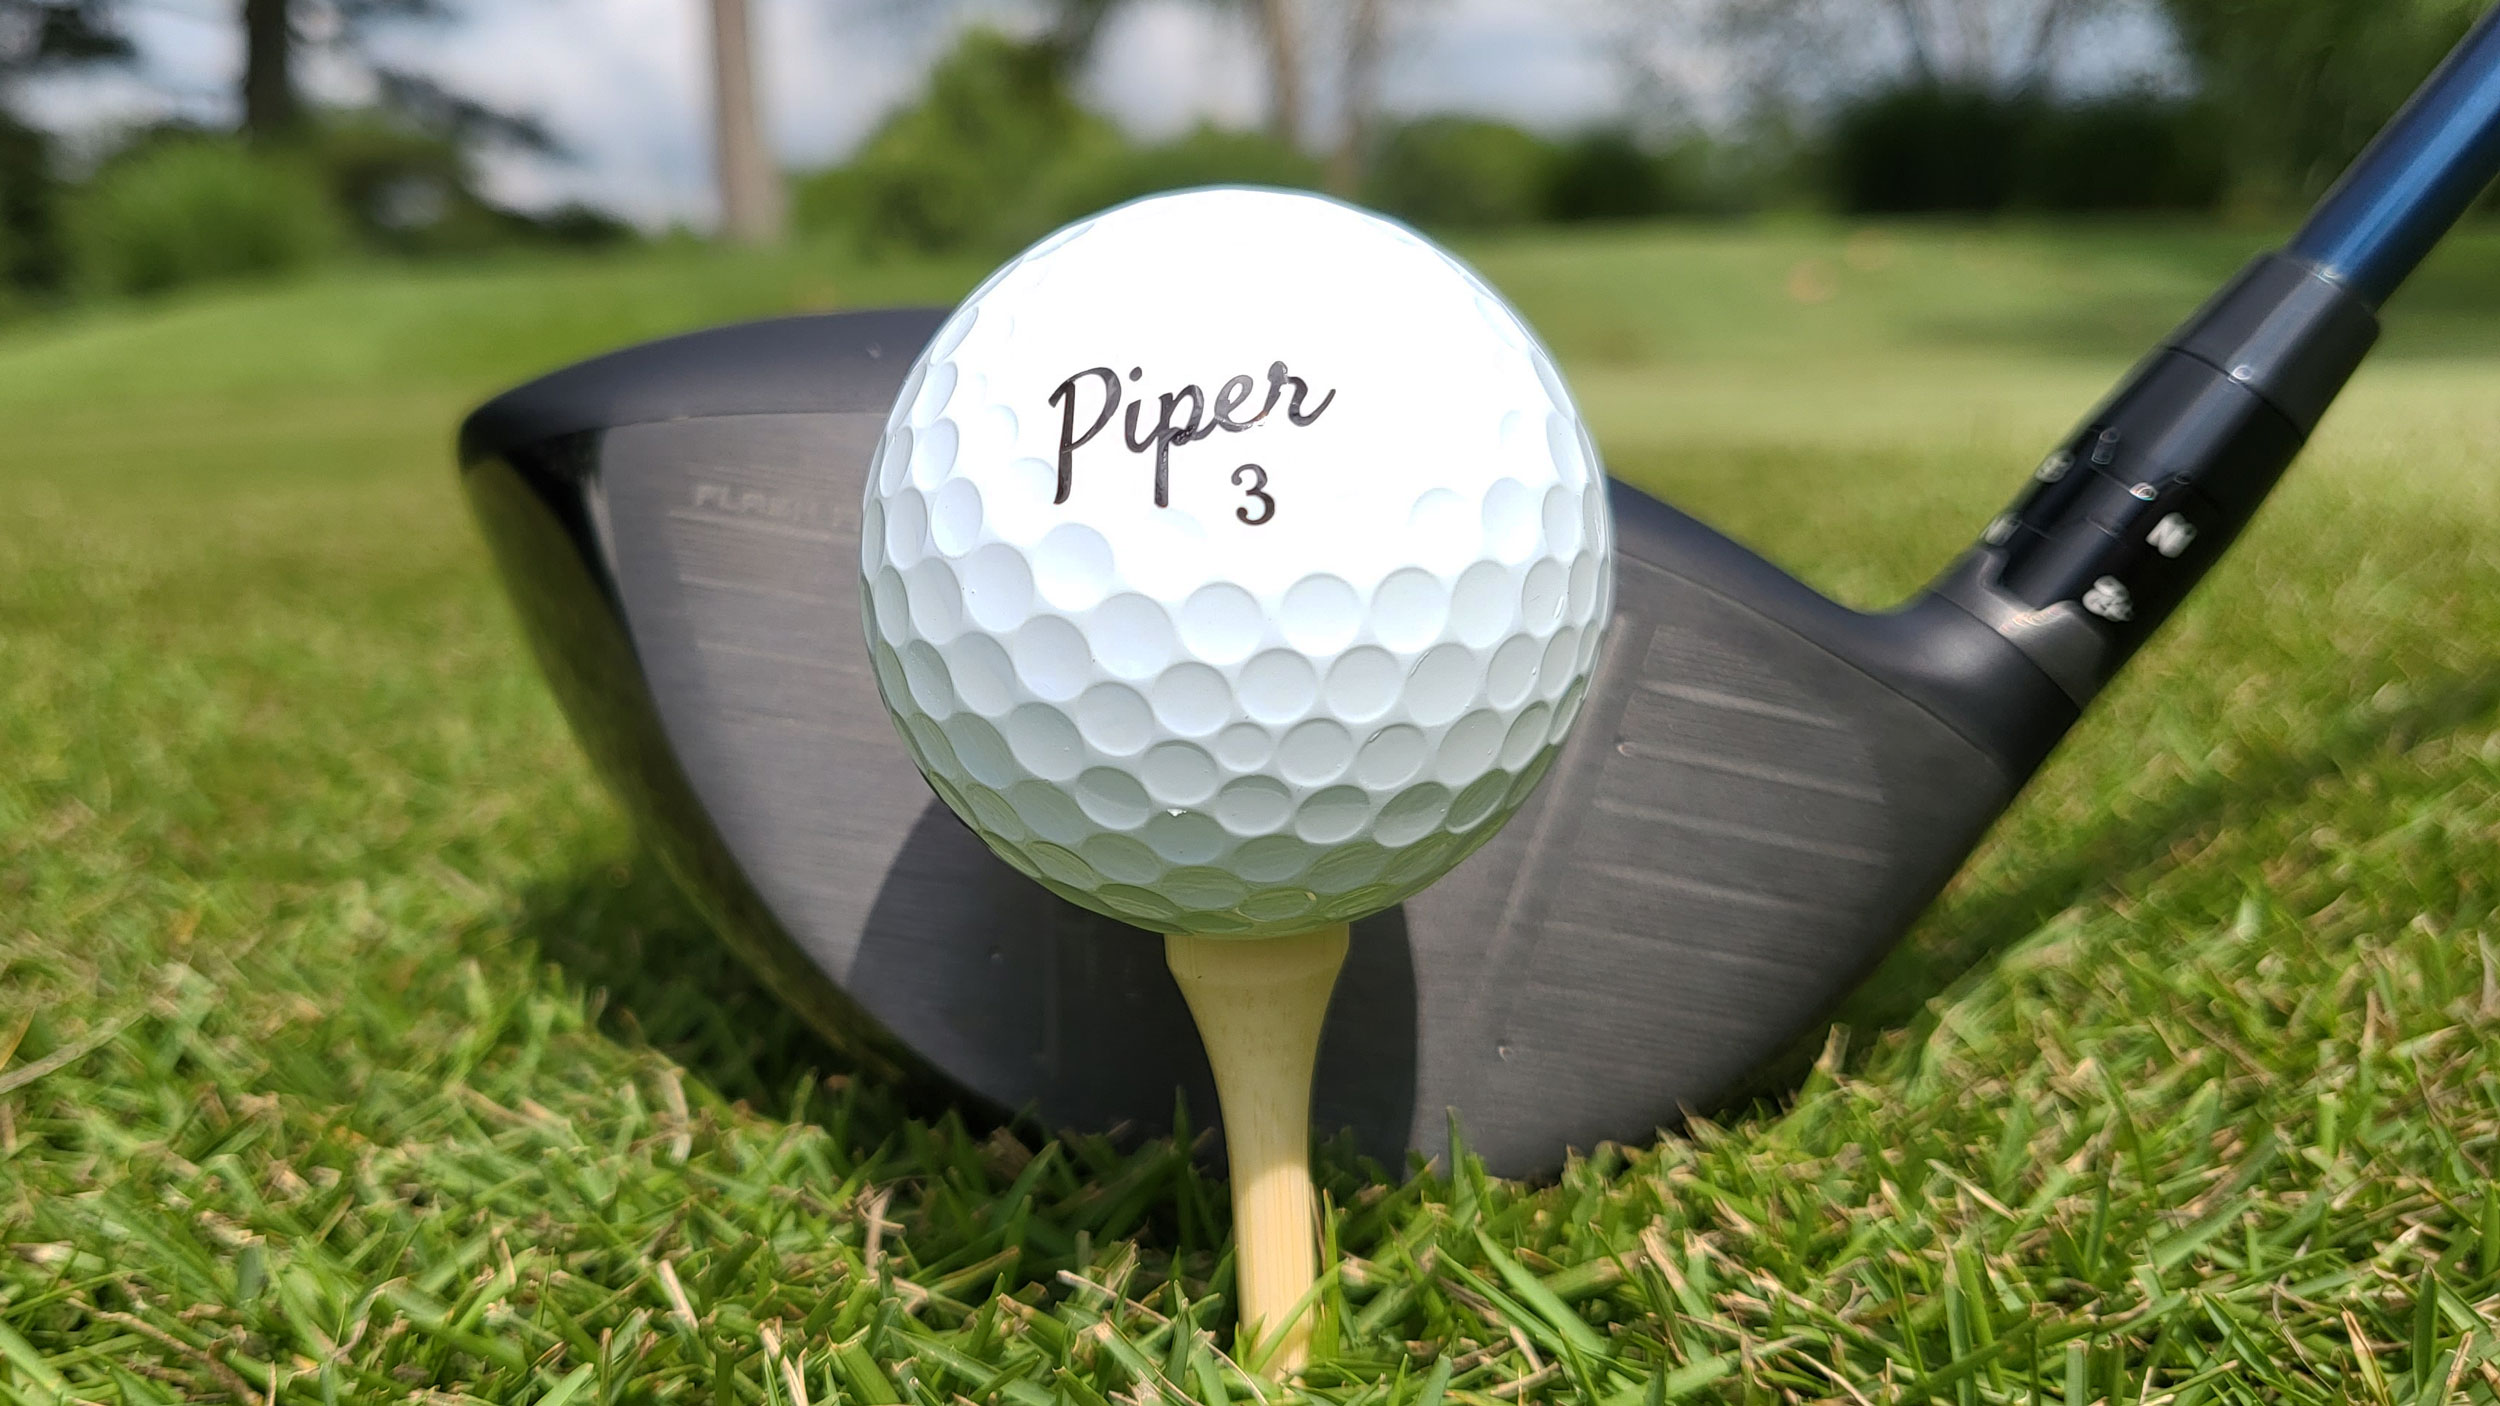 Piper Black Golf Ball Review | Golf Monthly